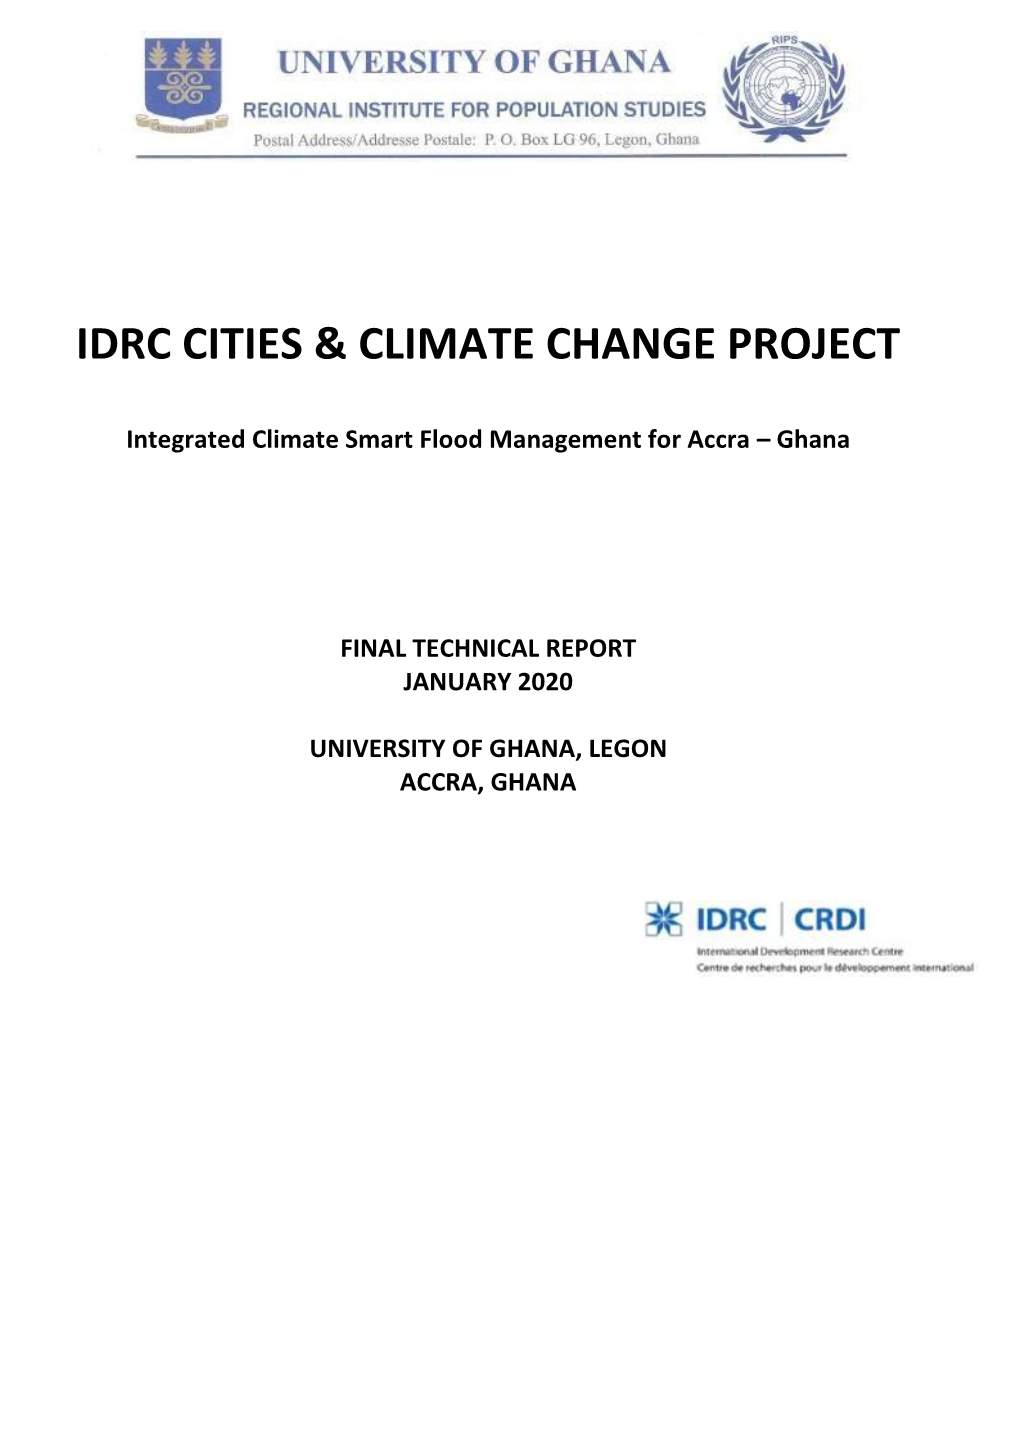 Integrated Climate Smart Flood Management for Accra – Ghana